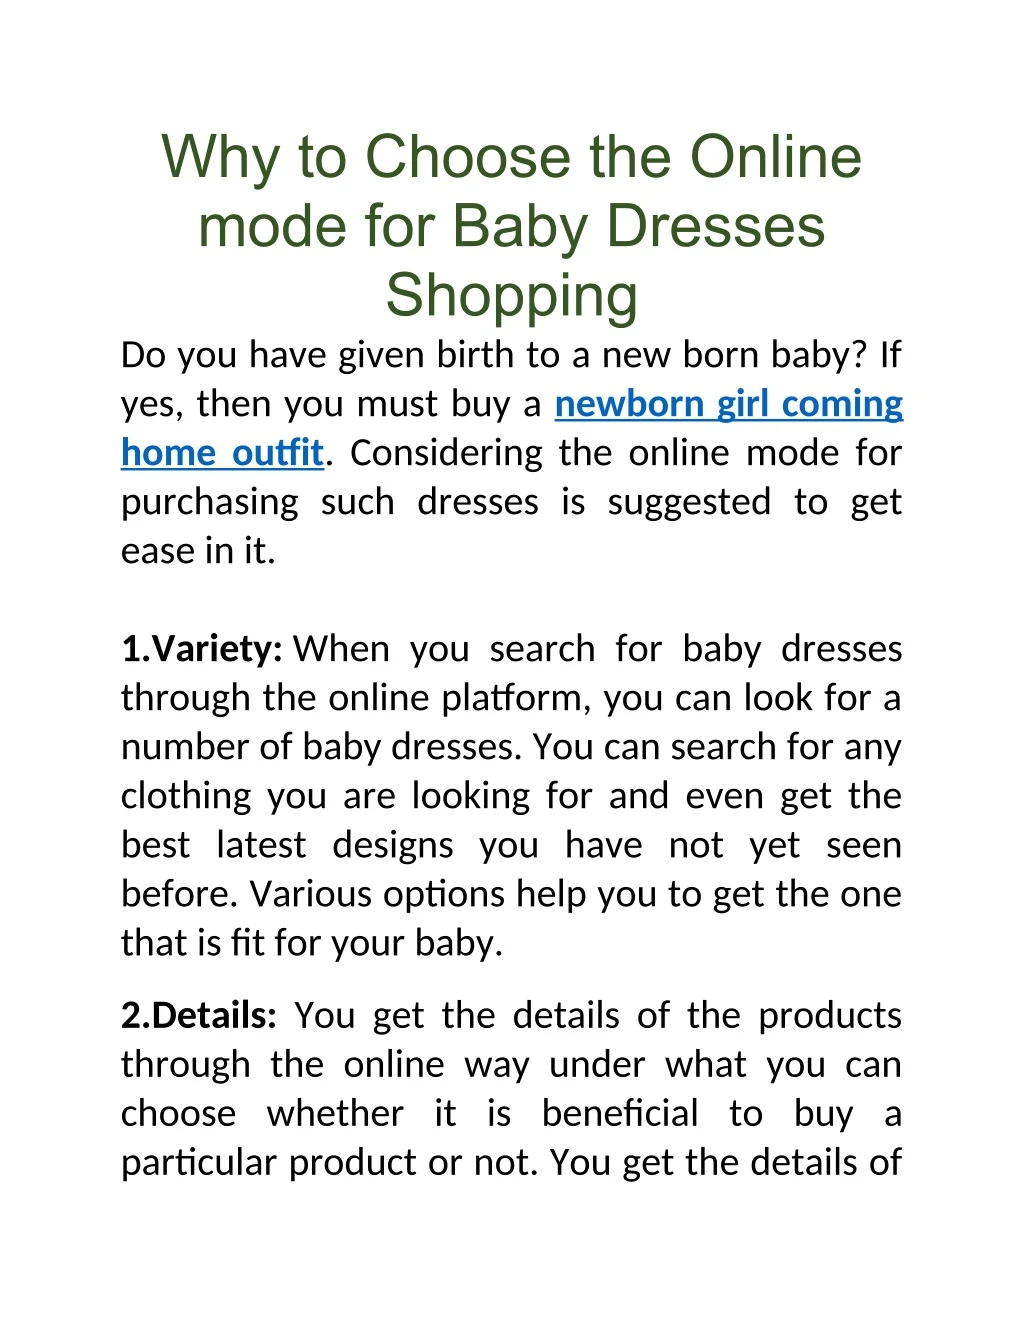 why to choose the online mode for baby dresses